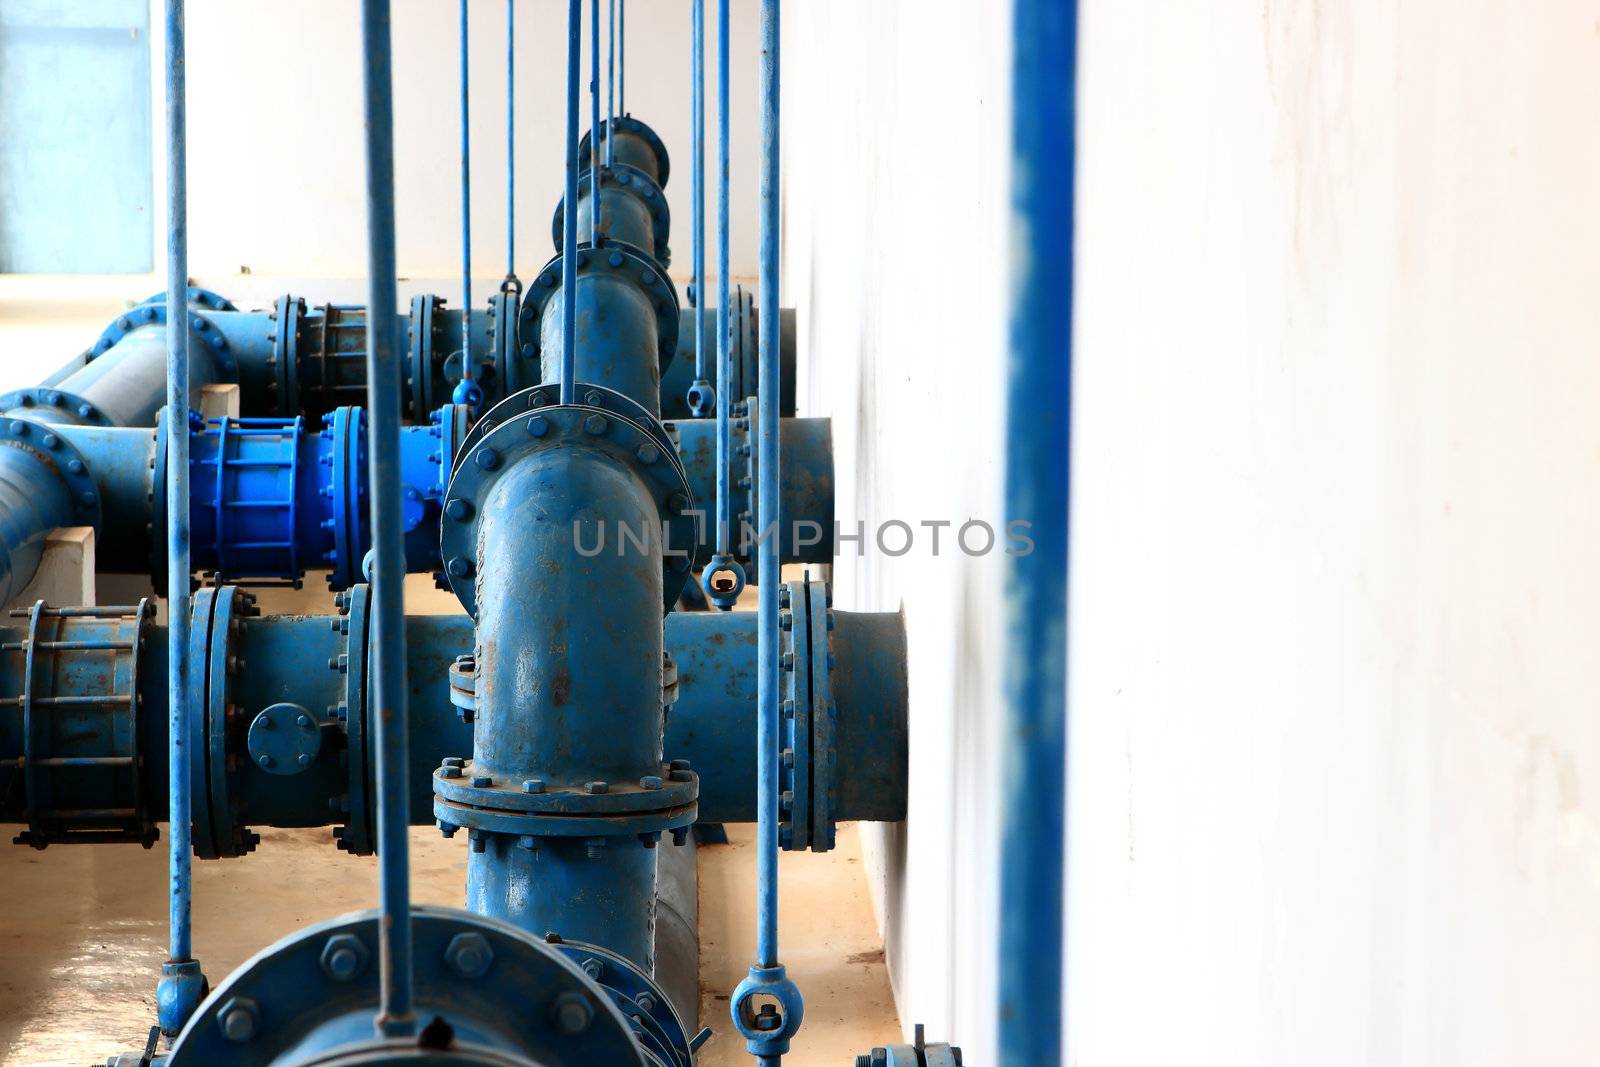 Water pumping station, industrial interior and pipes by rufous